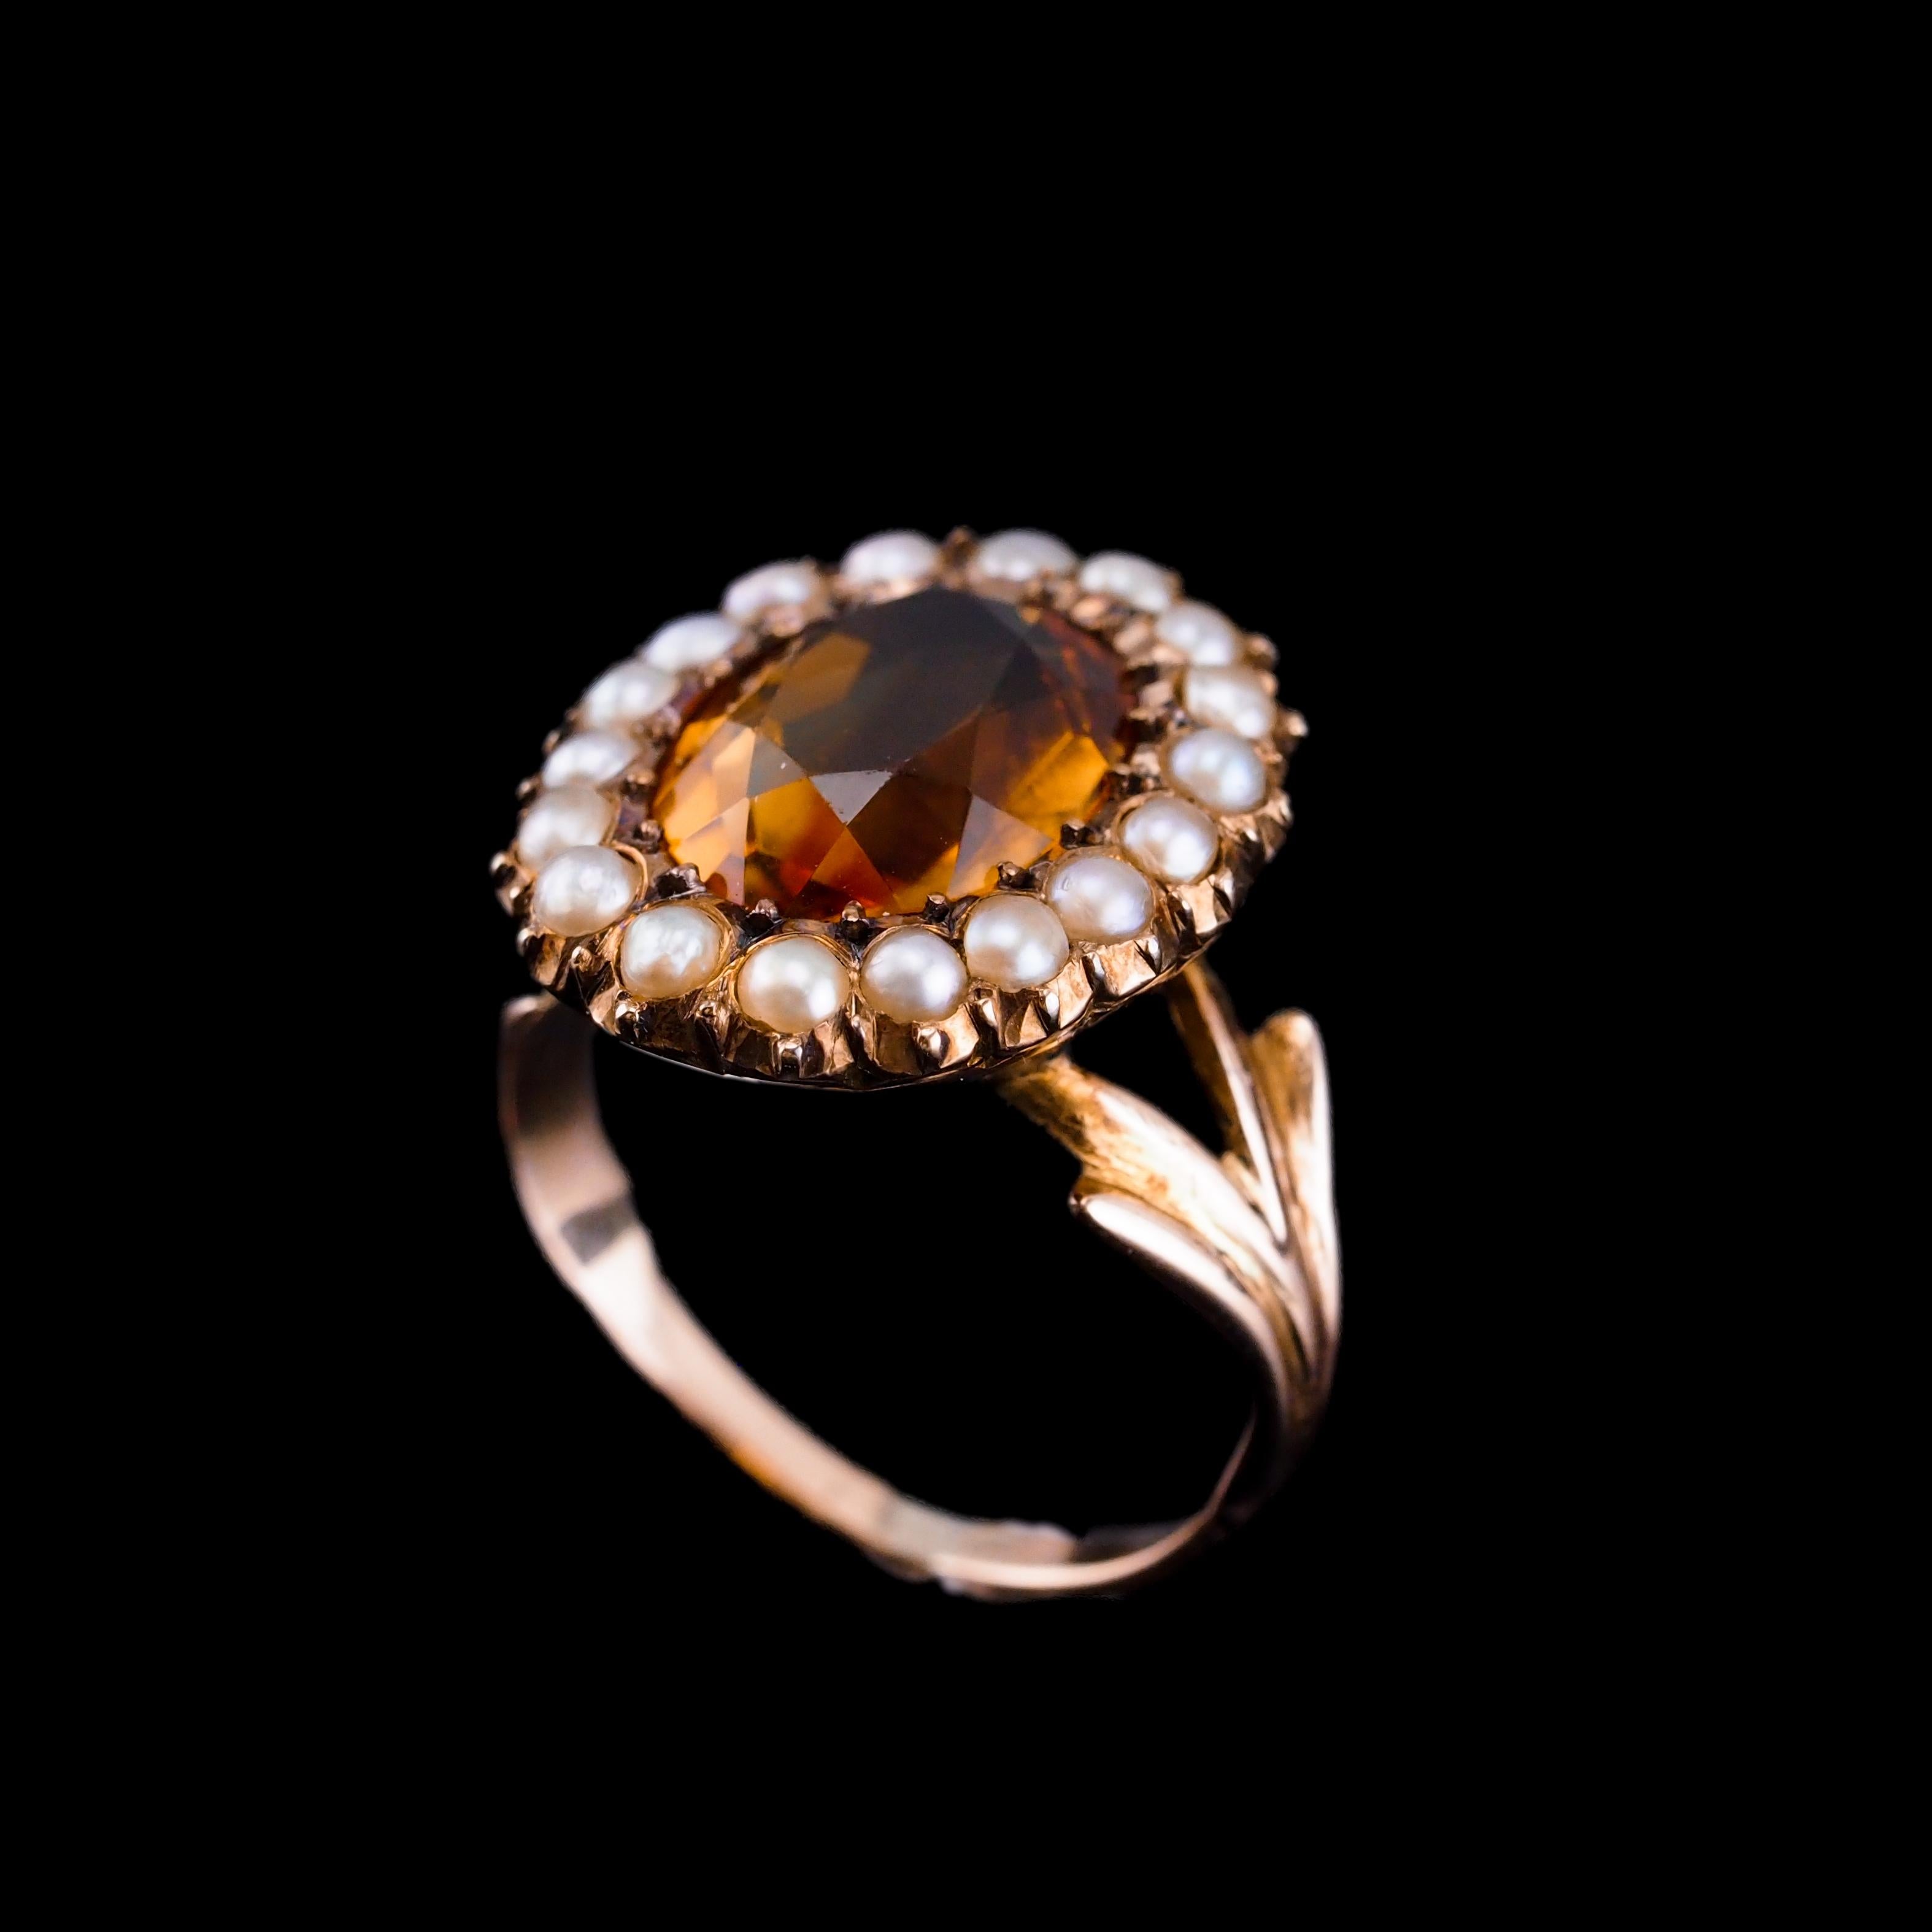 Antique Victorian Citrine & Seed Pearl Cluster Ring 9K Gold - c.1890 For Sale 5